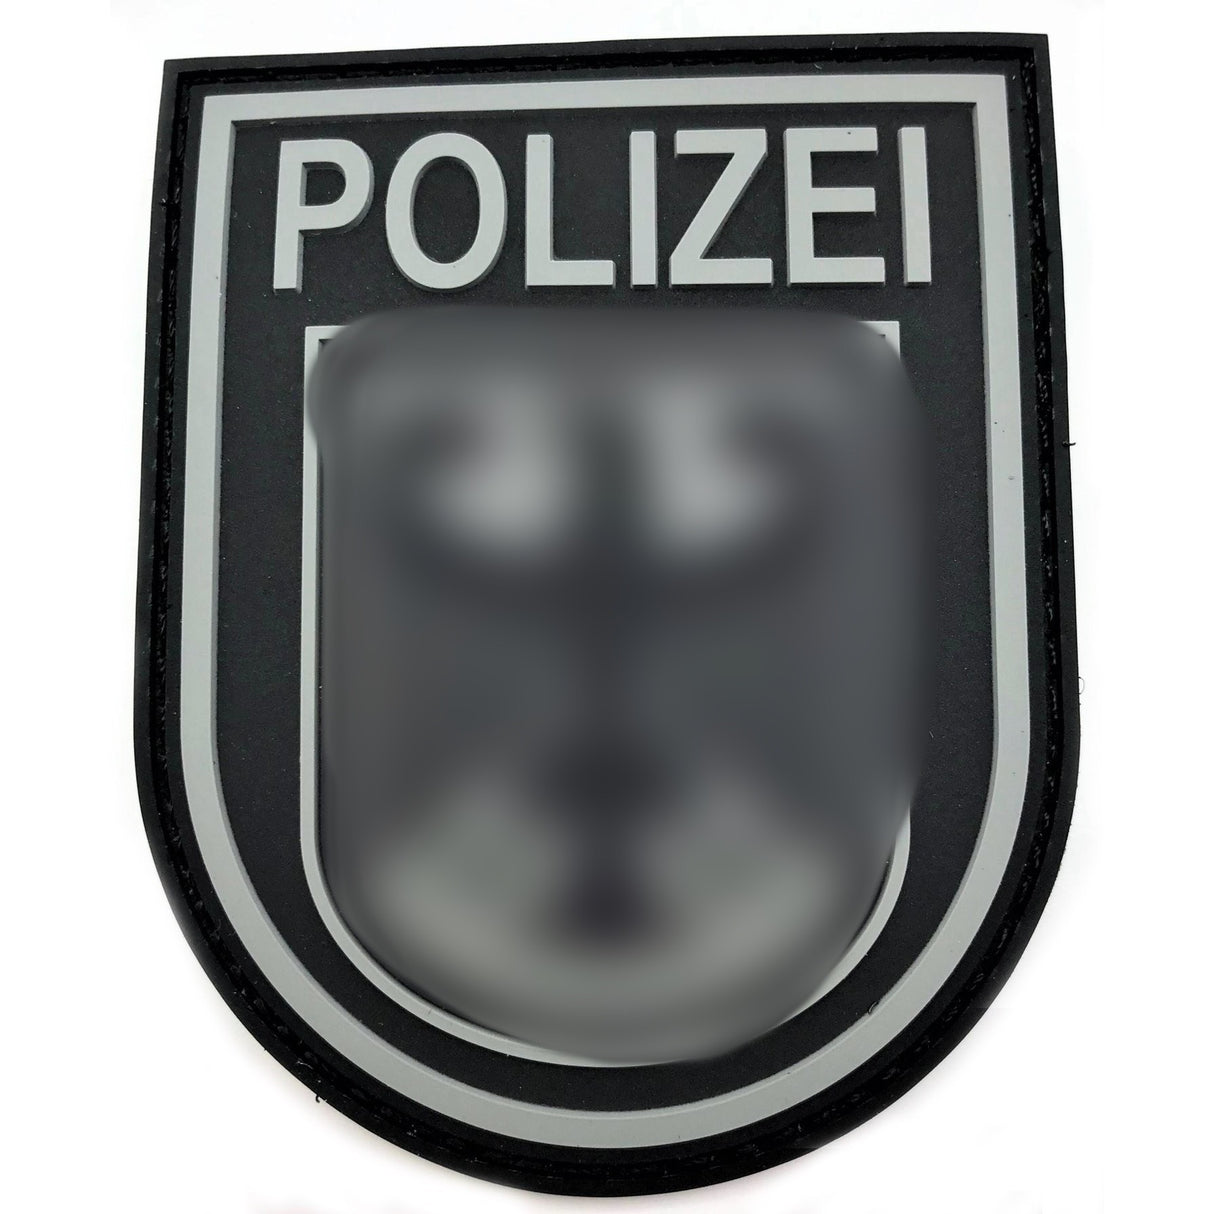 Federal Police "Black Ops" patch